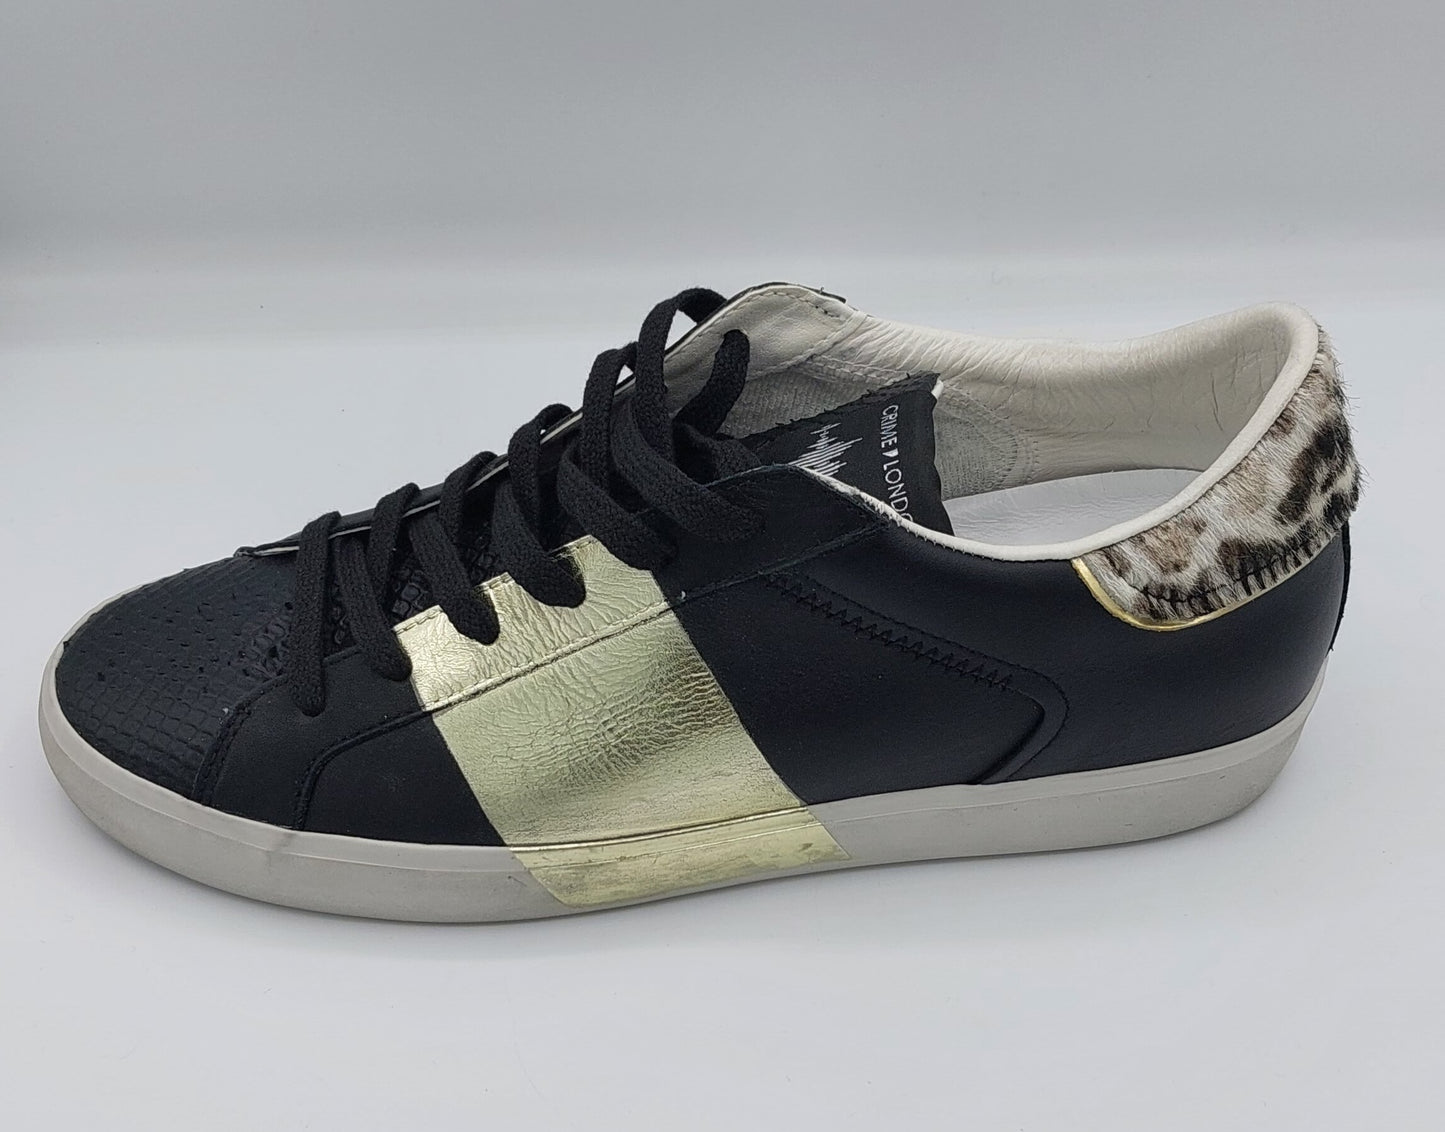 Crime London sneakers with gold band